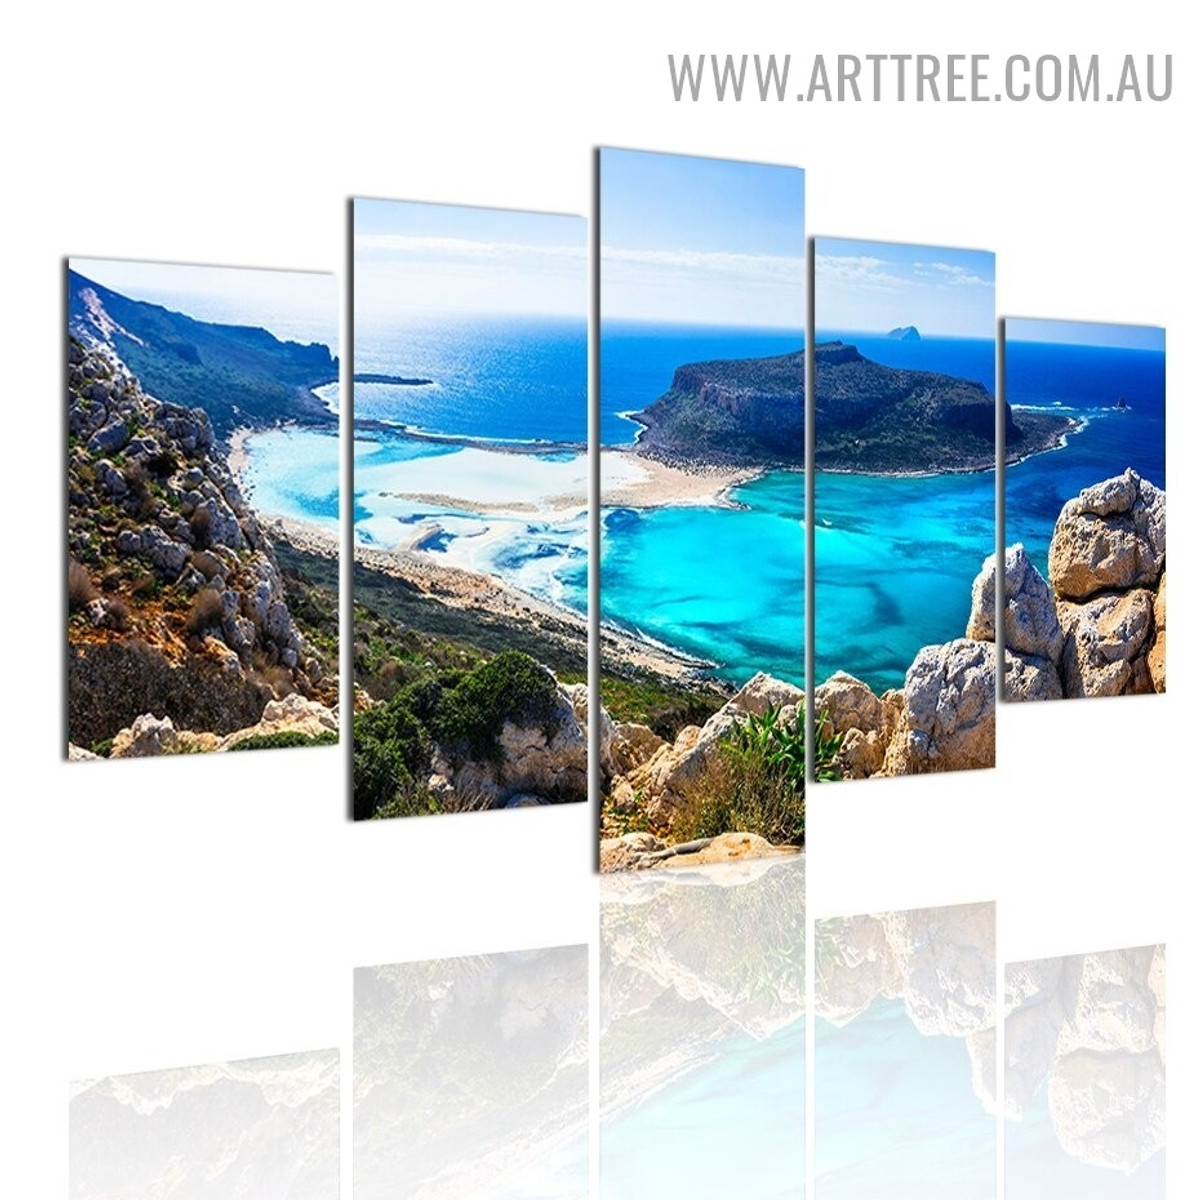 Balos Beach Island Water Naturescape 5 Piece Multi Panel Image Contemporary Canvas Painting Print for Room Wall Embellishment